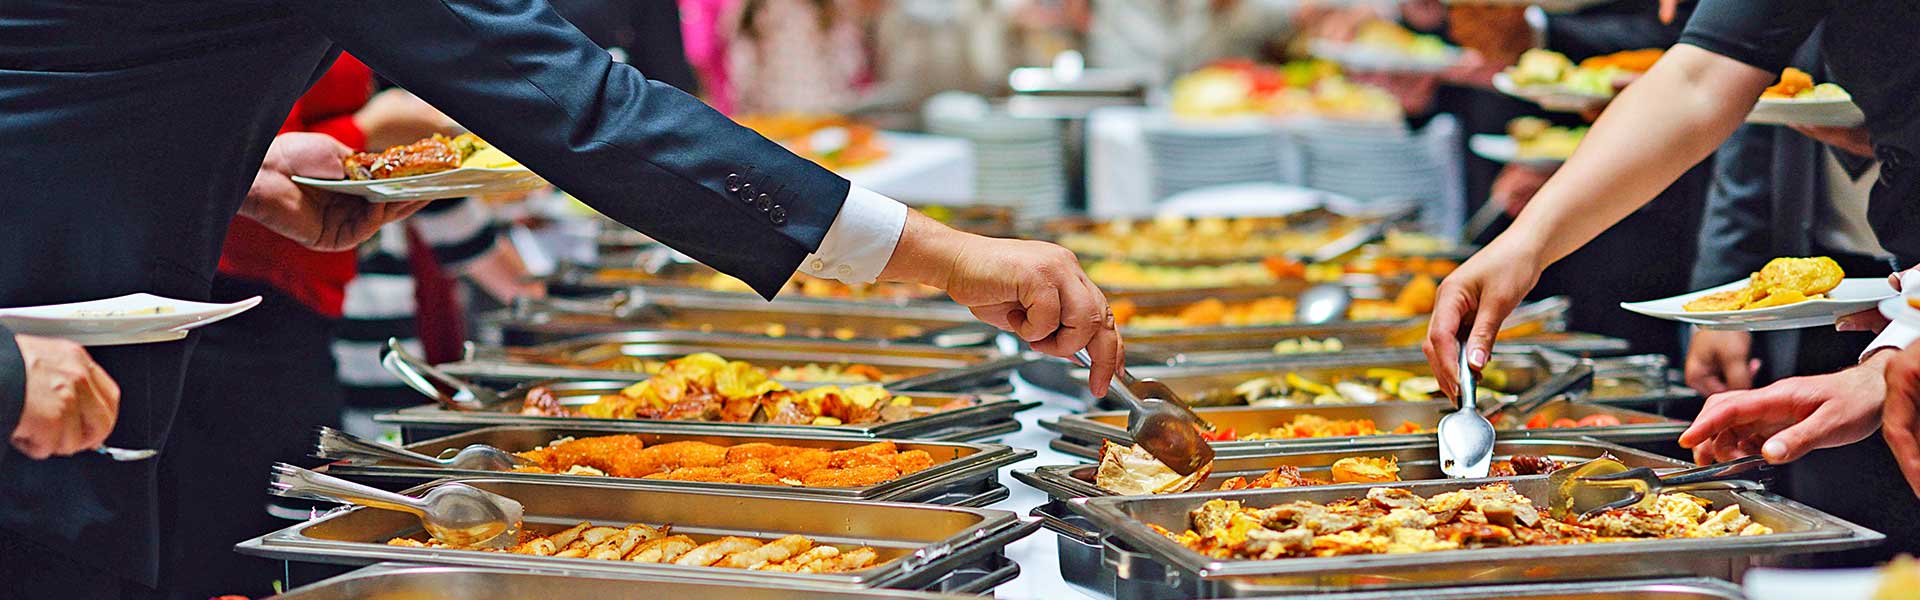 Buffet style catering image showing chaffing disshes